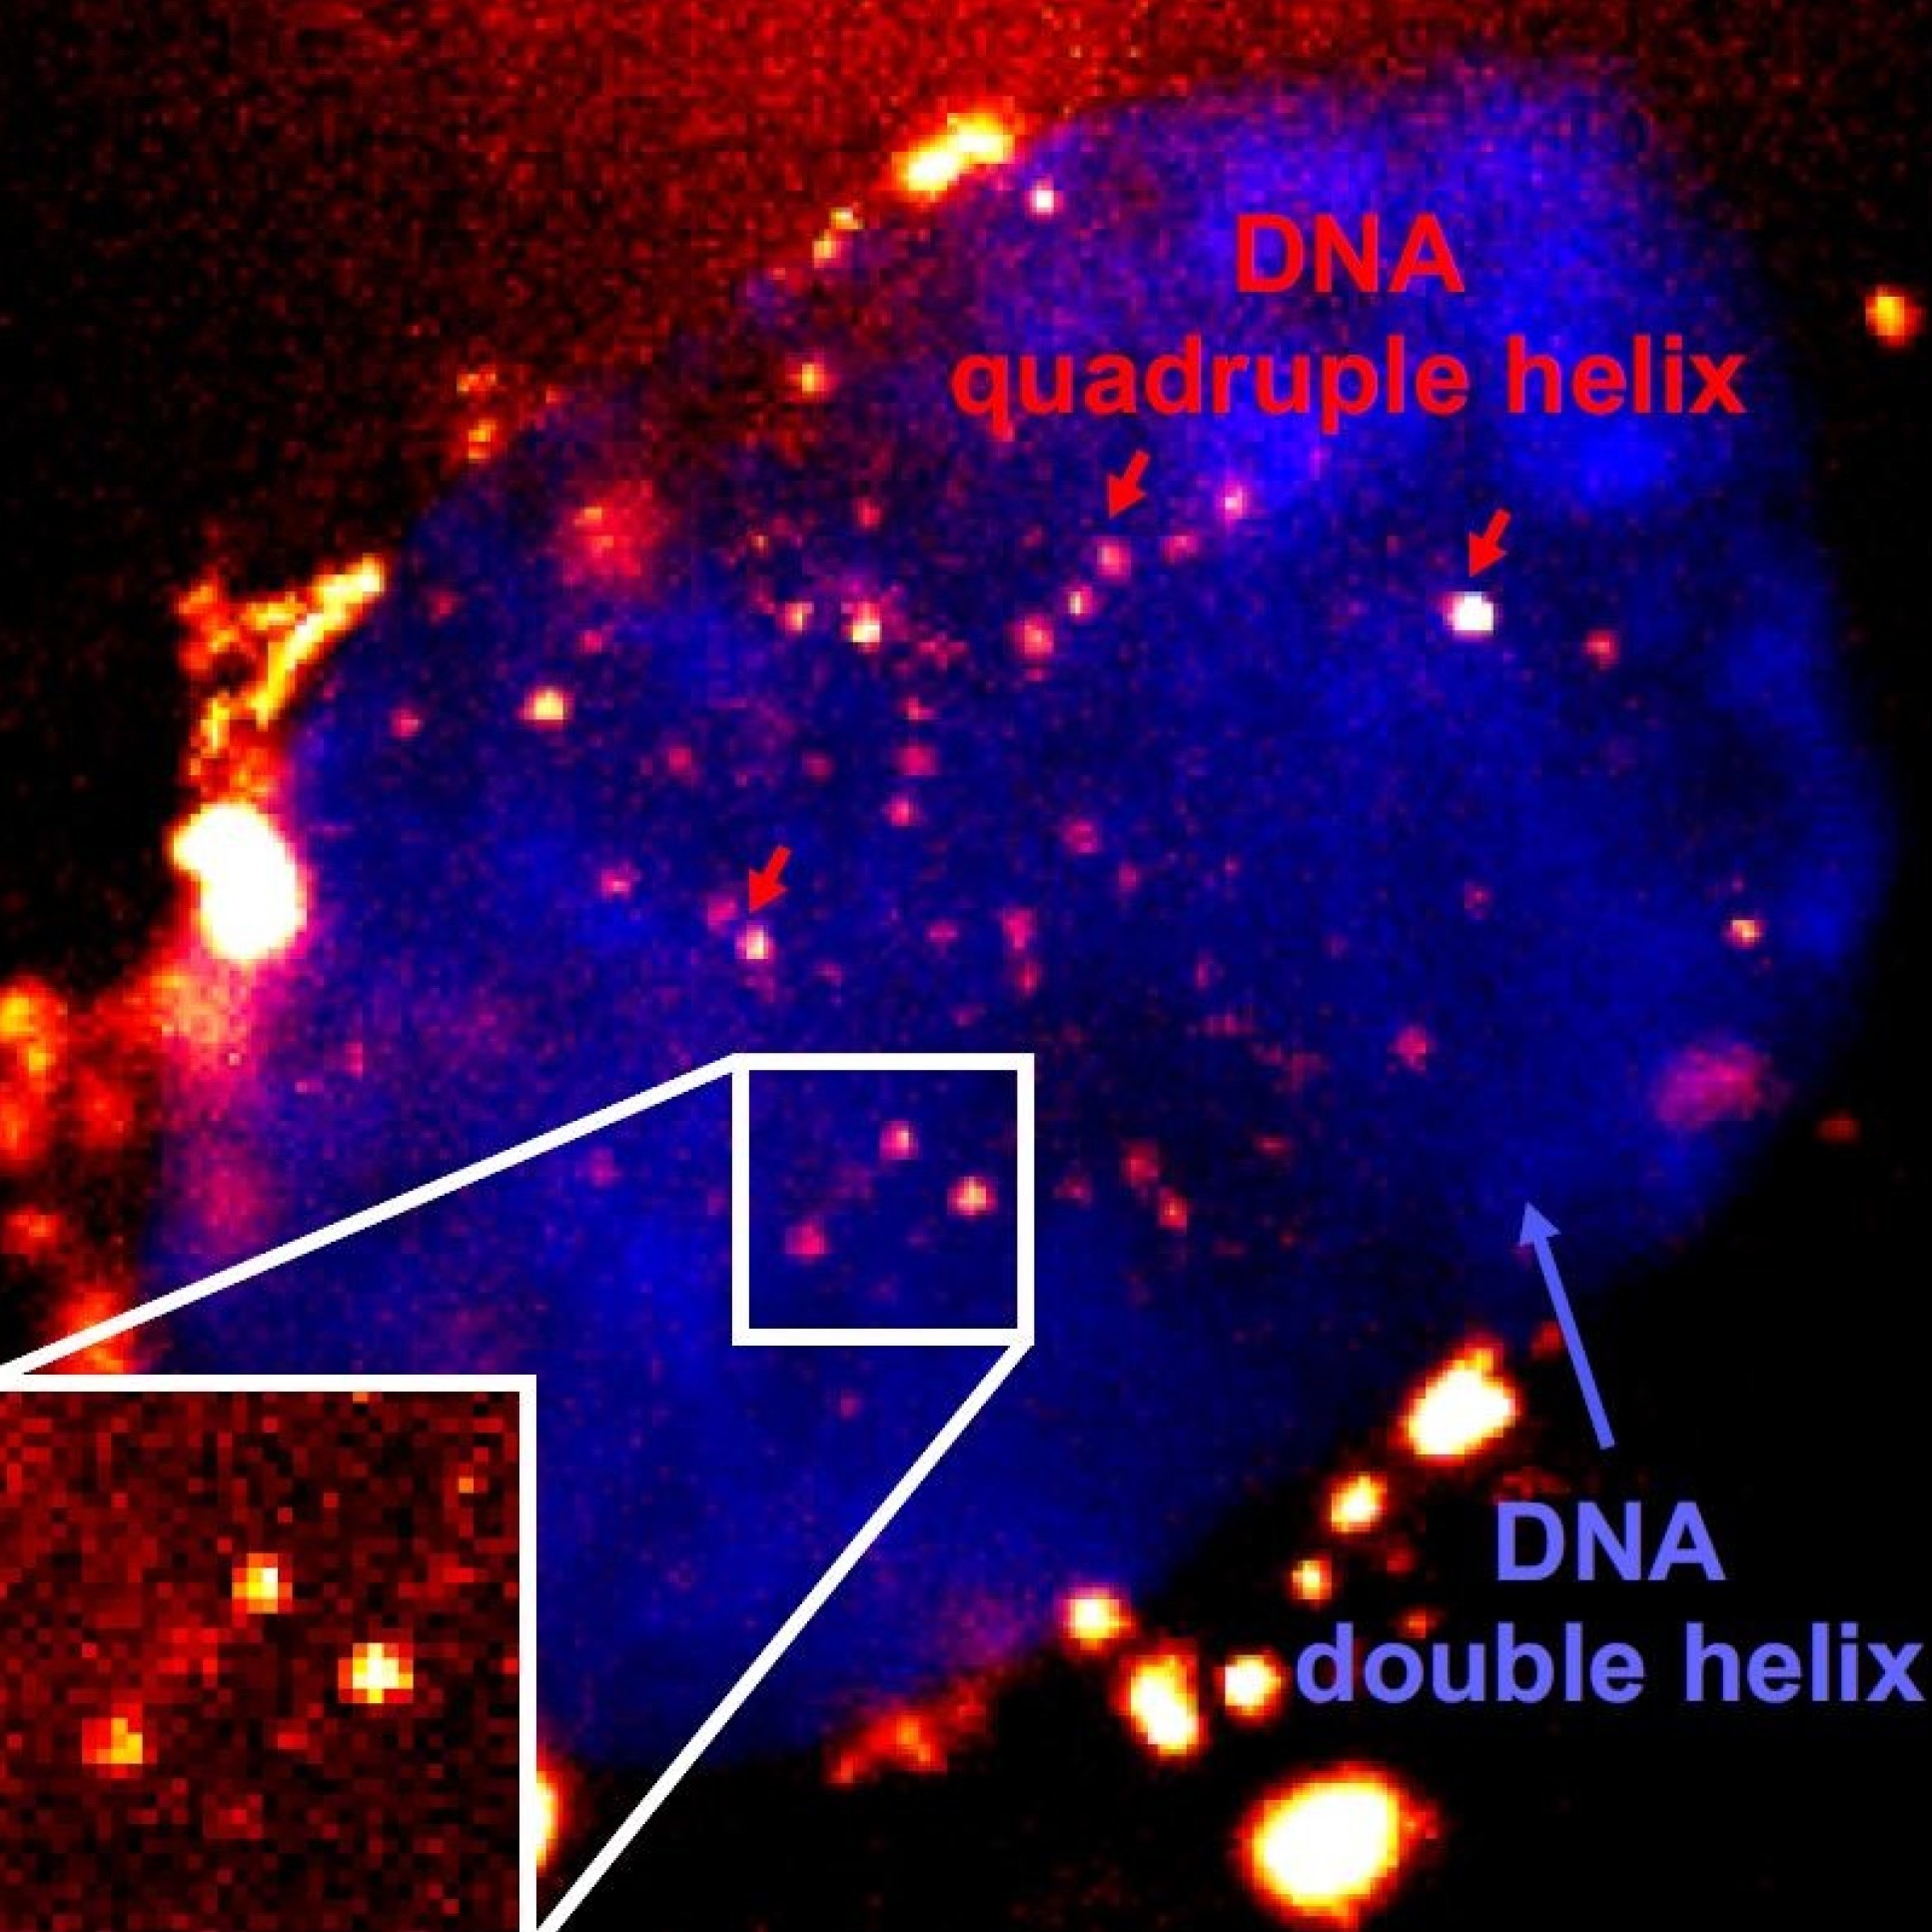 Microscopy image of quadruple helix DNA highlighted in yellow on a background of blue double helix DNA